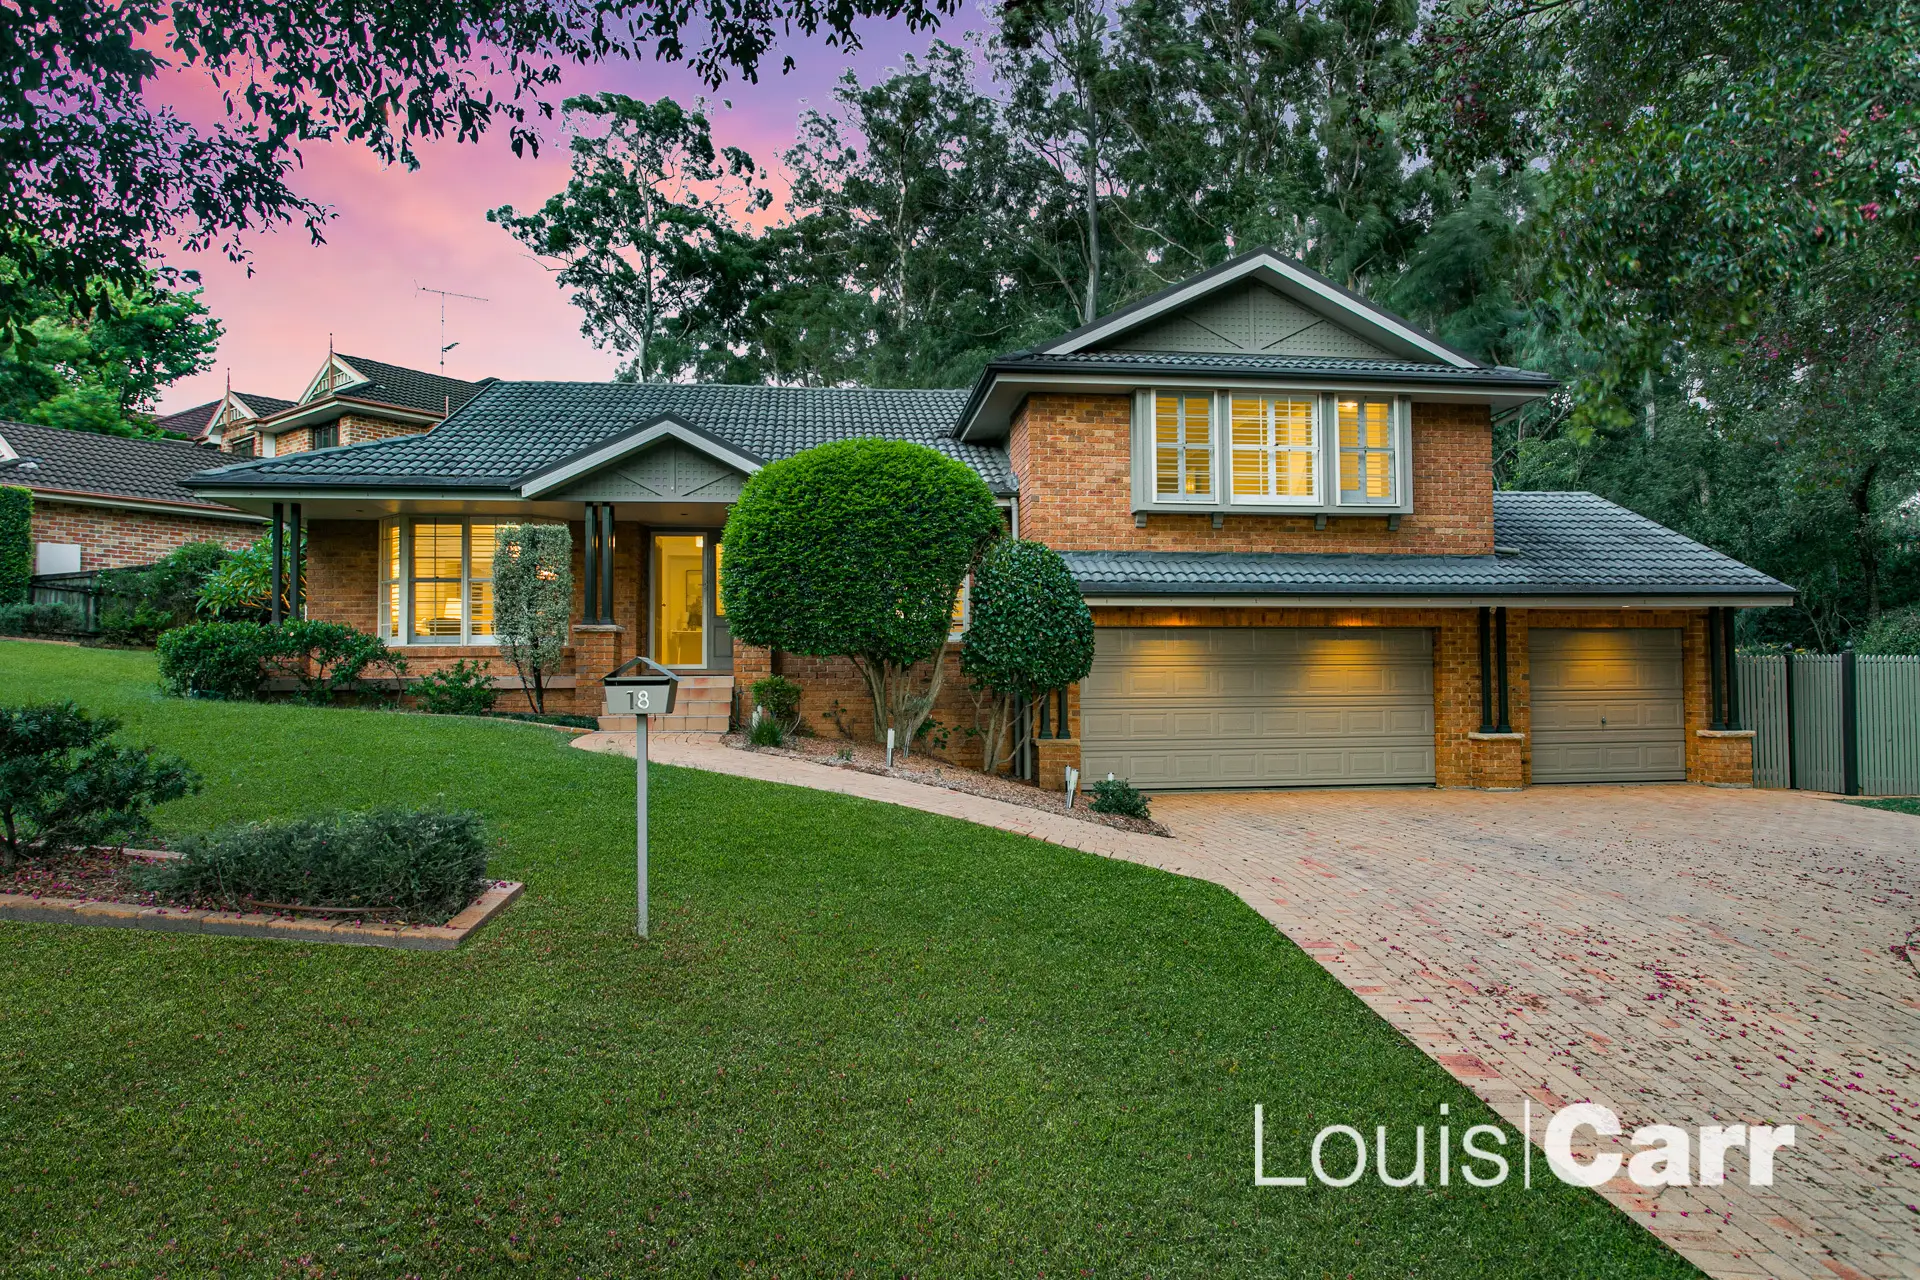 Photo #1: 18 Lyndhurst Court, West Pennant Hills - Sold by Louis Carr Real Estate